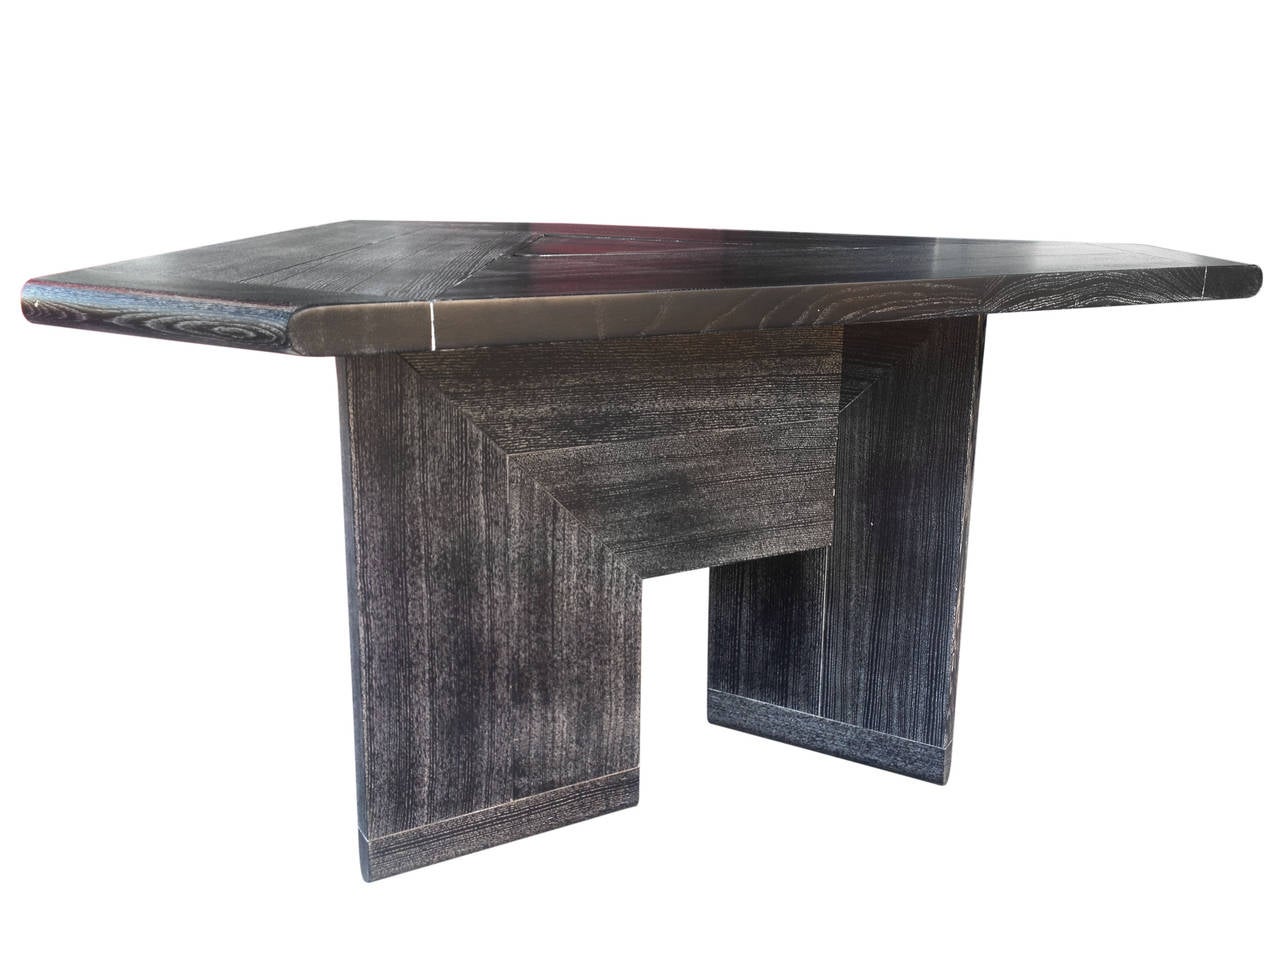 20th Century Architectural Dining Table with Removable Center